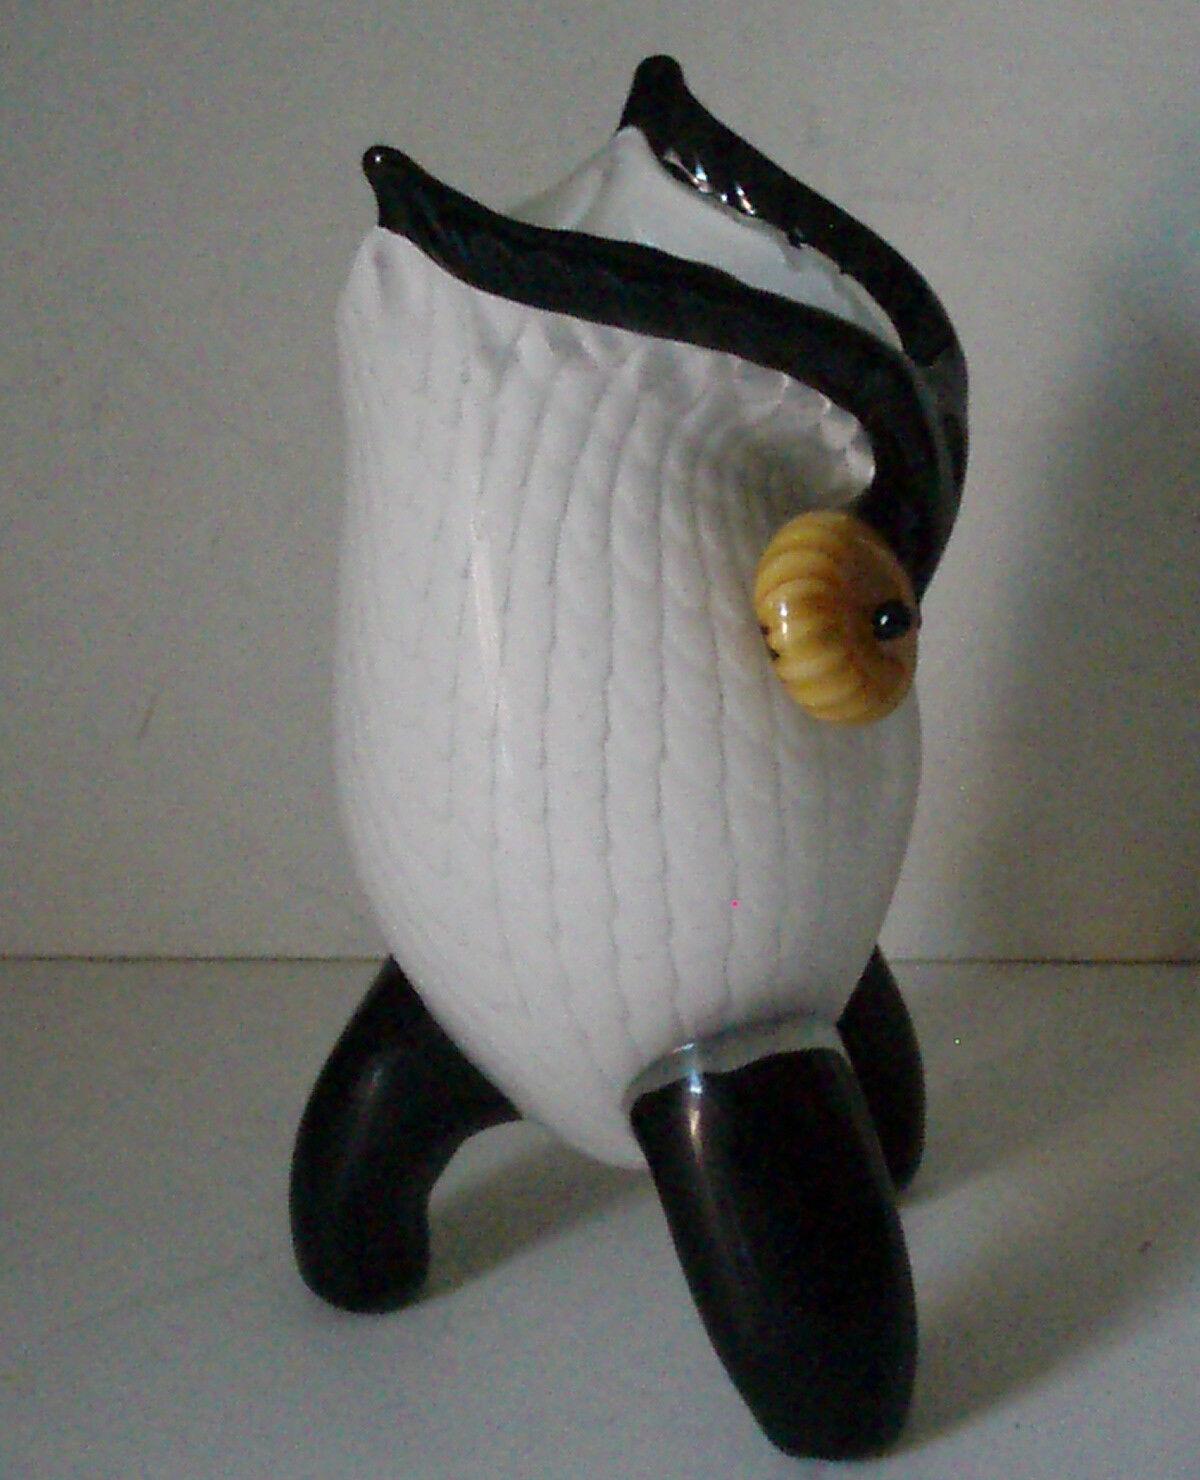 For the lovers of Murano, an alluring hoot owl art glass vase in iconic white and black glass, approx. size: 10.5 inches high x 5 inches wide x 4 inches deep. Approx. weight: 8 lbs. Fabulous colors and workmanship, so well done. A wonderful class